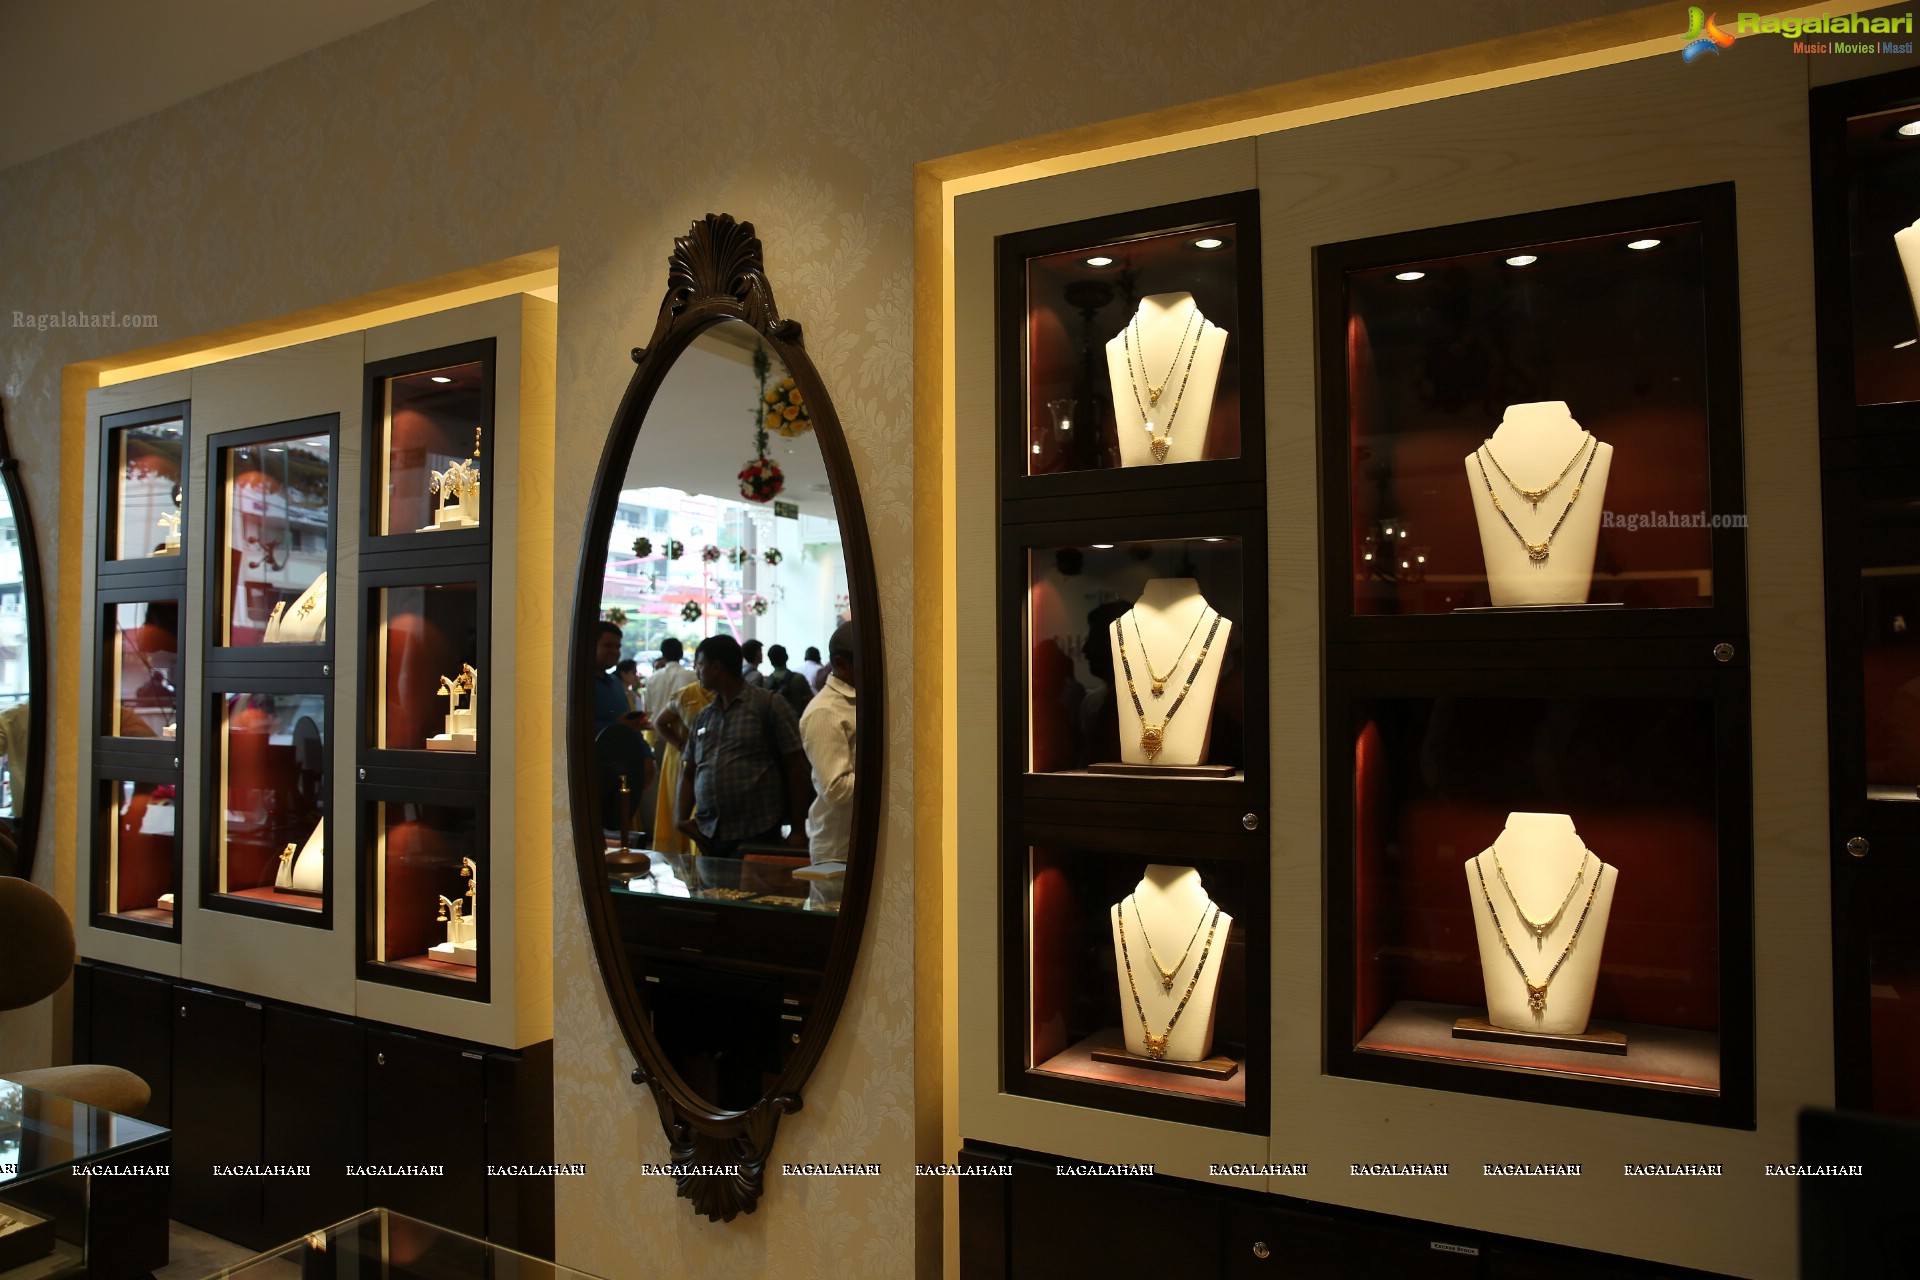 Tanishq Jewellery Launches Their New Store at Begumpet